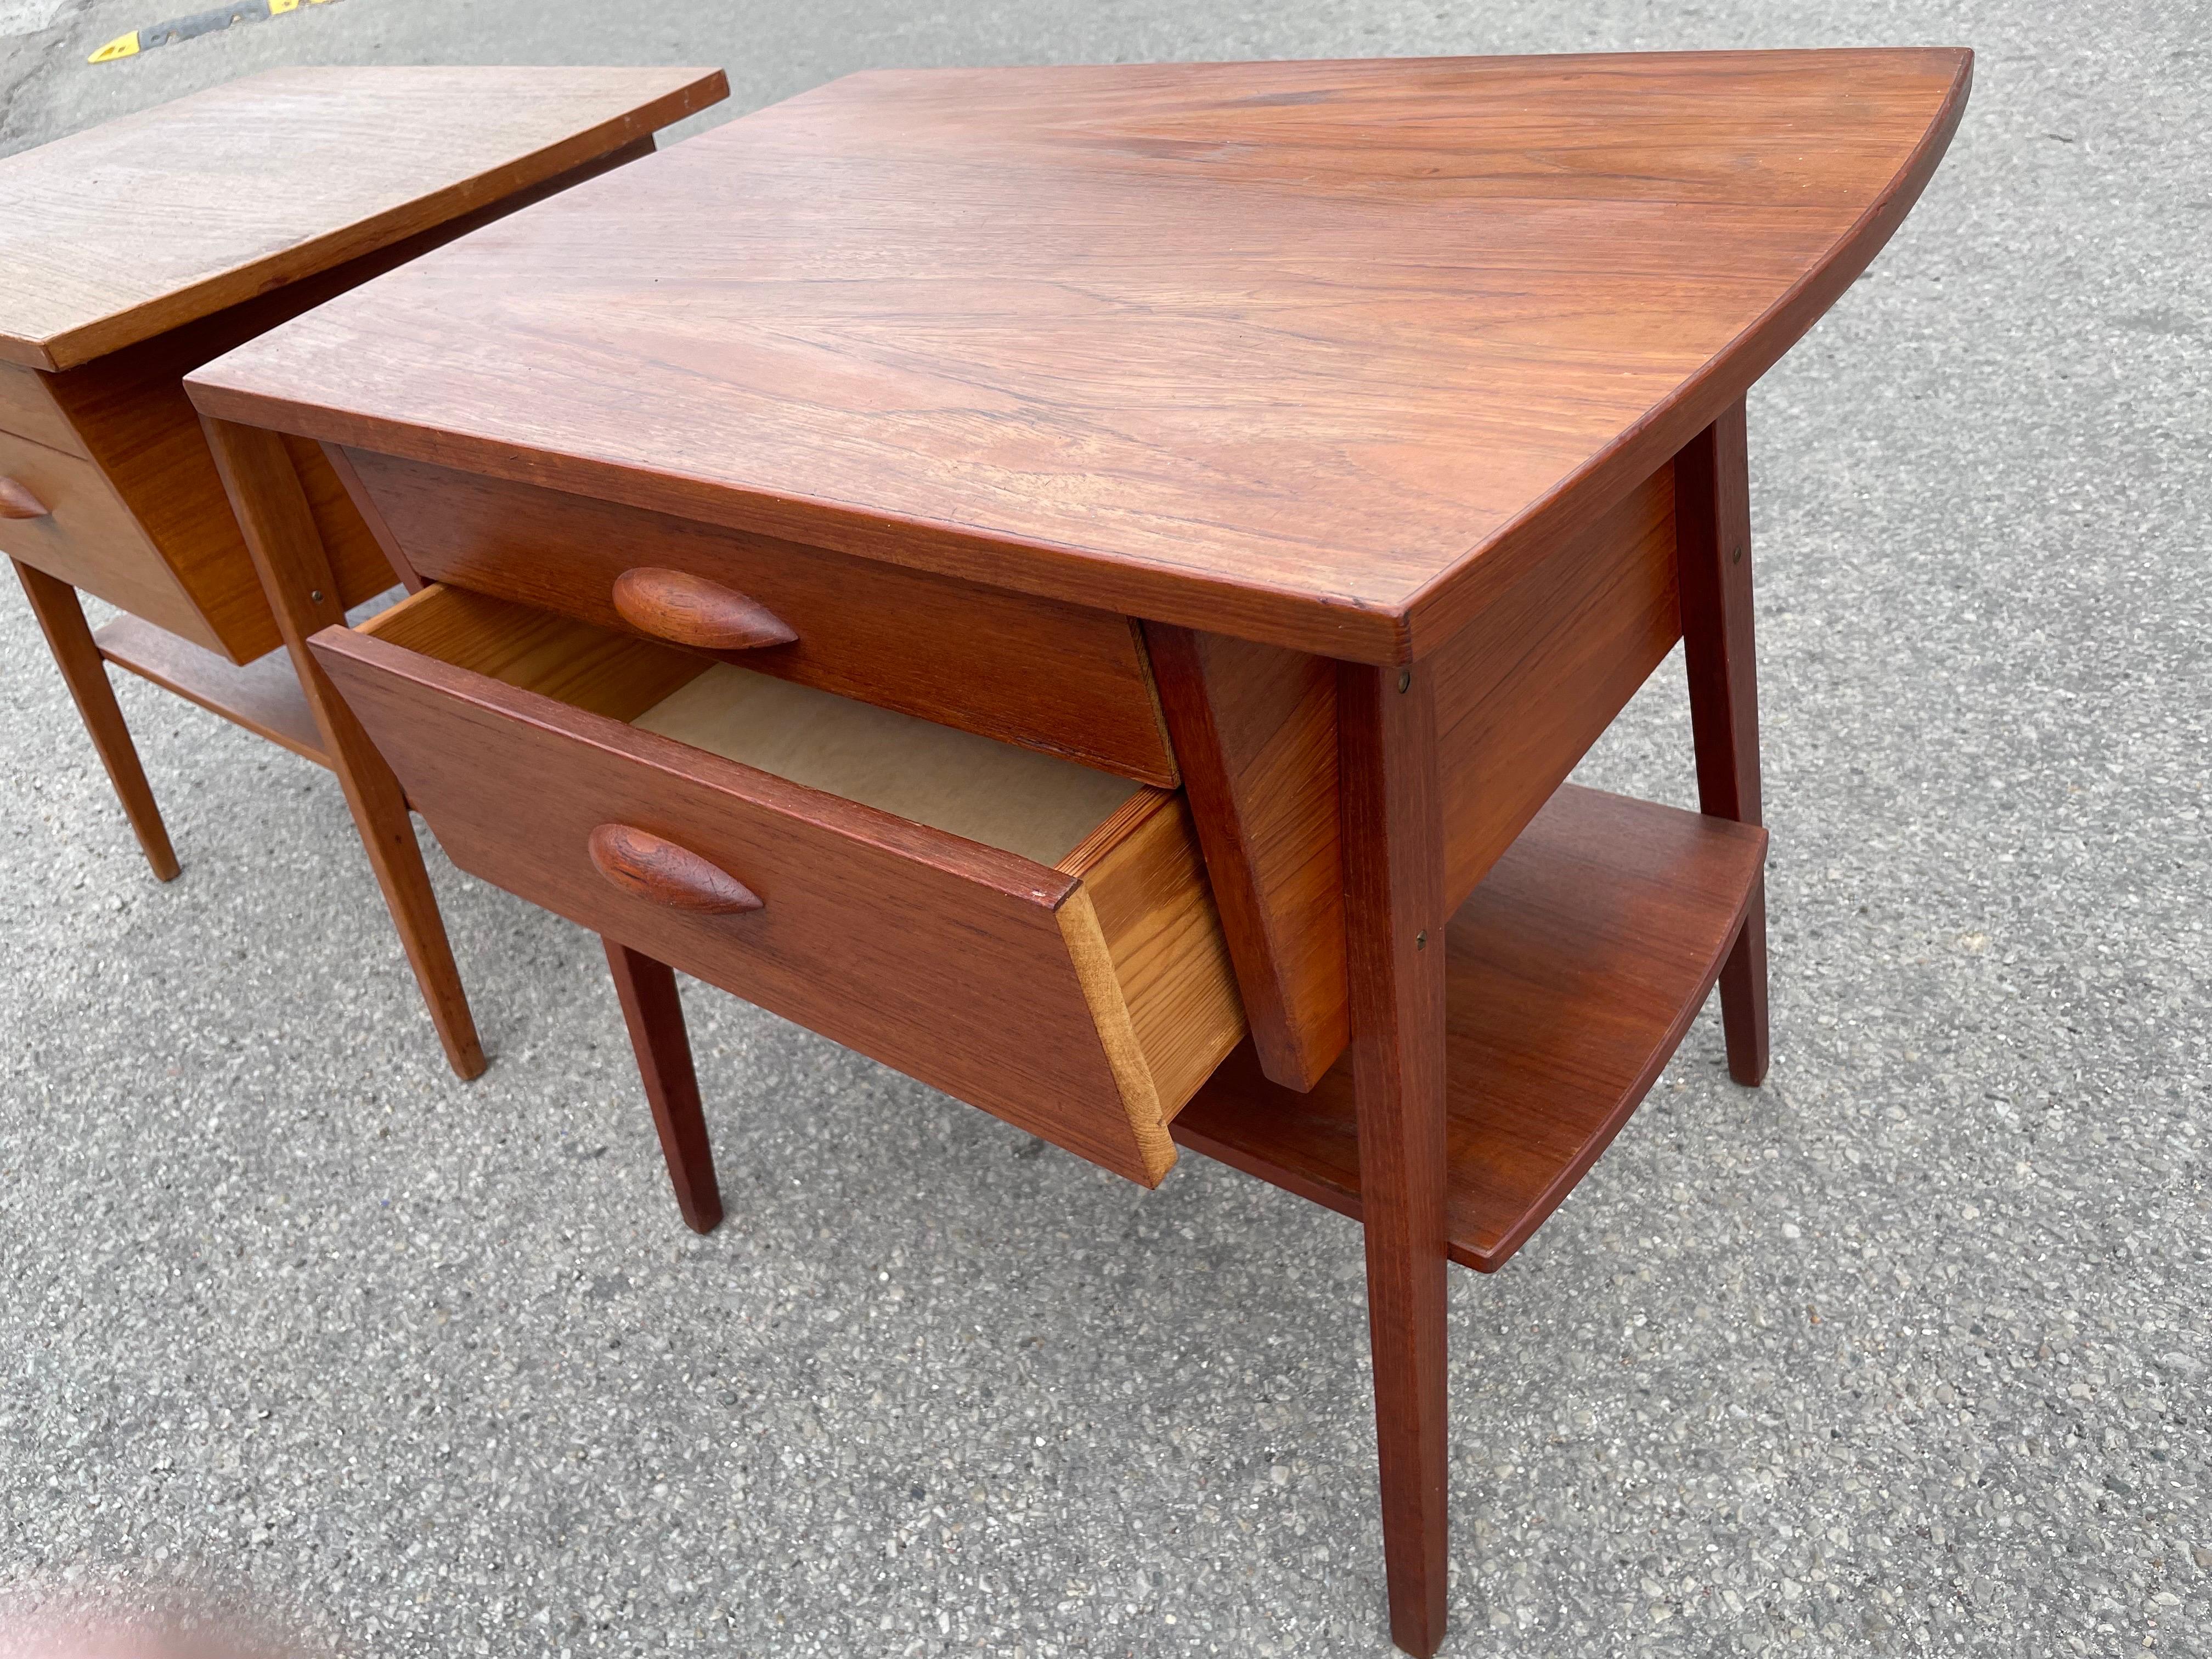 1960s Teak Nightstands. Crafted in Denmark, these sleek and timeless pieces effortlessly blend form and function. Made from exquisite teak wood, each nightstand showcases elegant lines, organic textures, and warm hues. With their compact size and